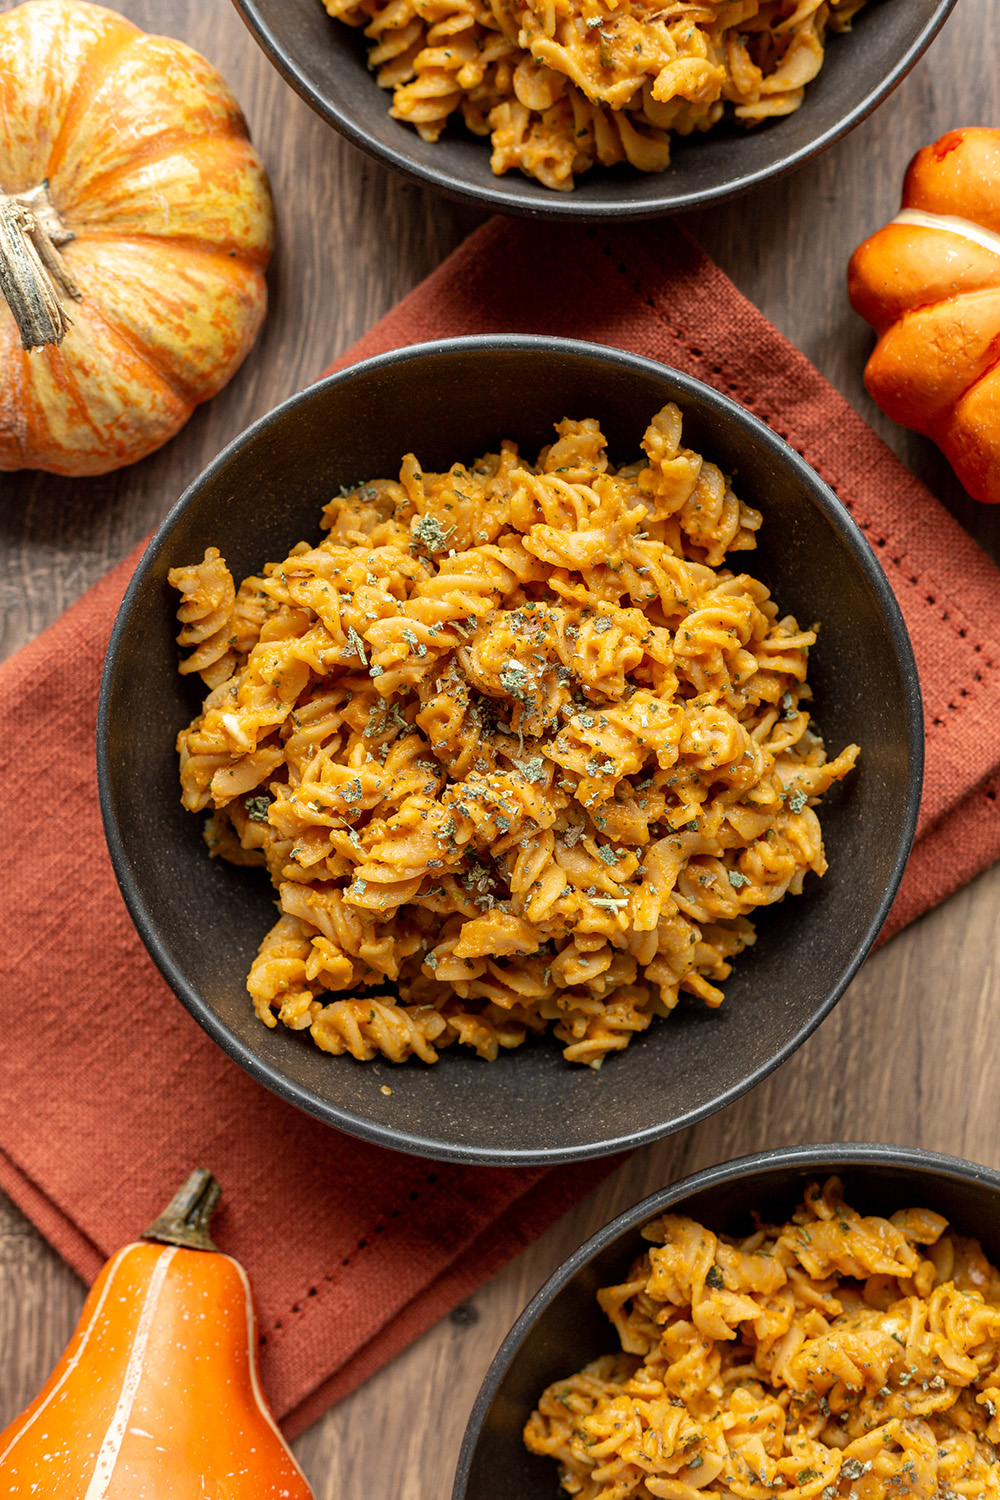 Creamy Pumpkin Pasta Recipe smothered in a mouth-watering pumpkin puree sauce